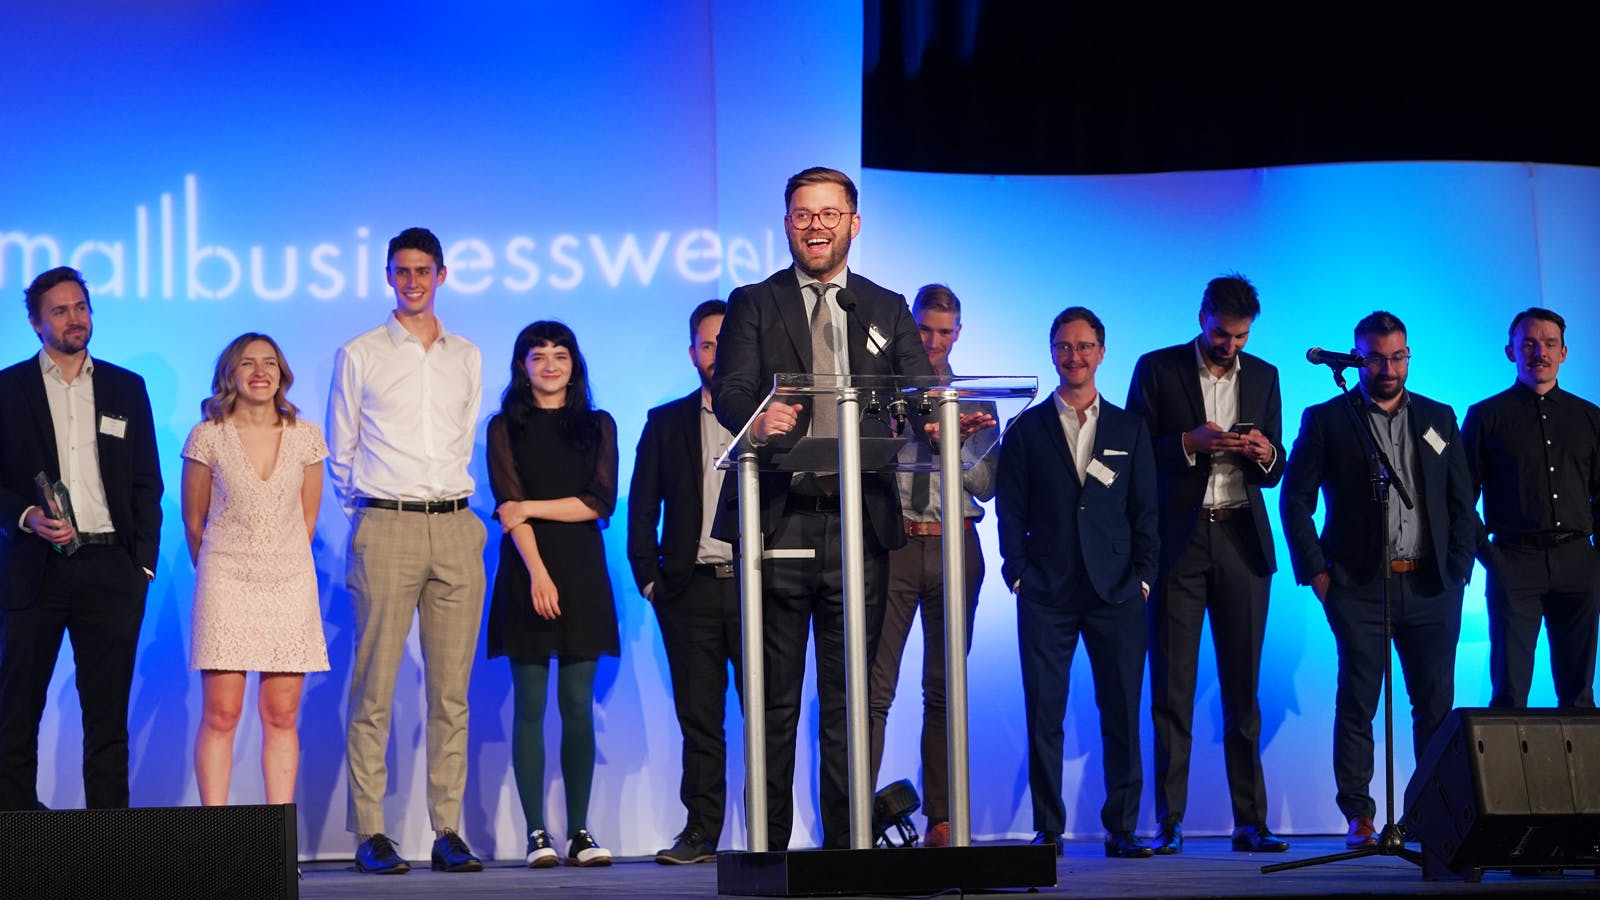 Goodlawyer CEO Brett Colvin and his team accepting the ATB Business of the Year Award at the Small Business Awards 2022.